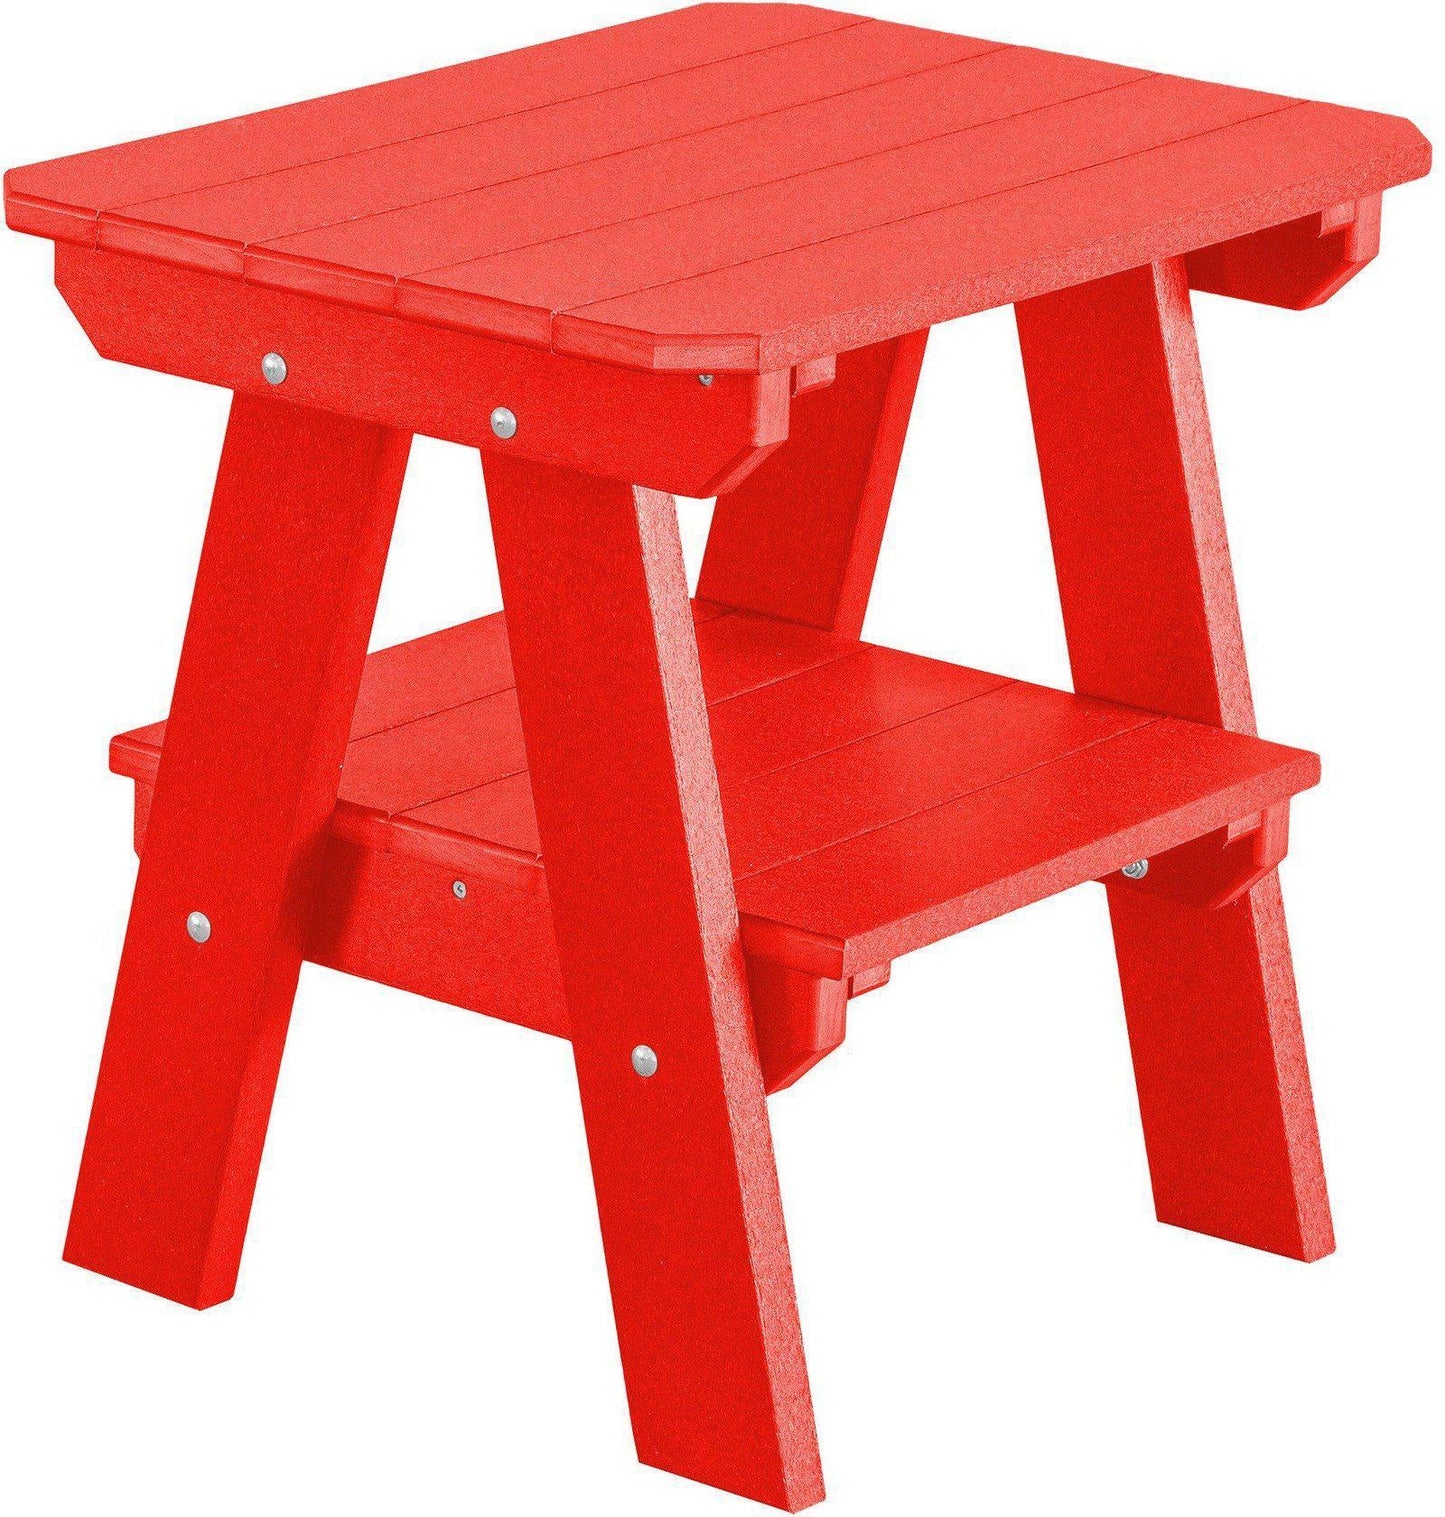 Wildridge Recycled Plastic Heritage 2 Tier End Table - Bright Red